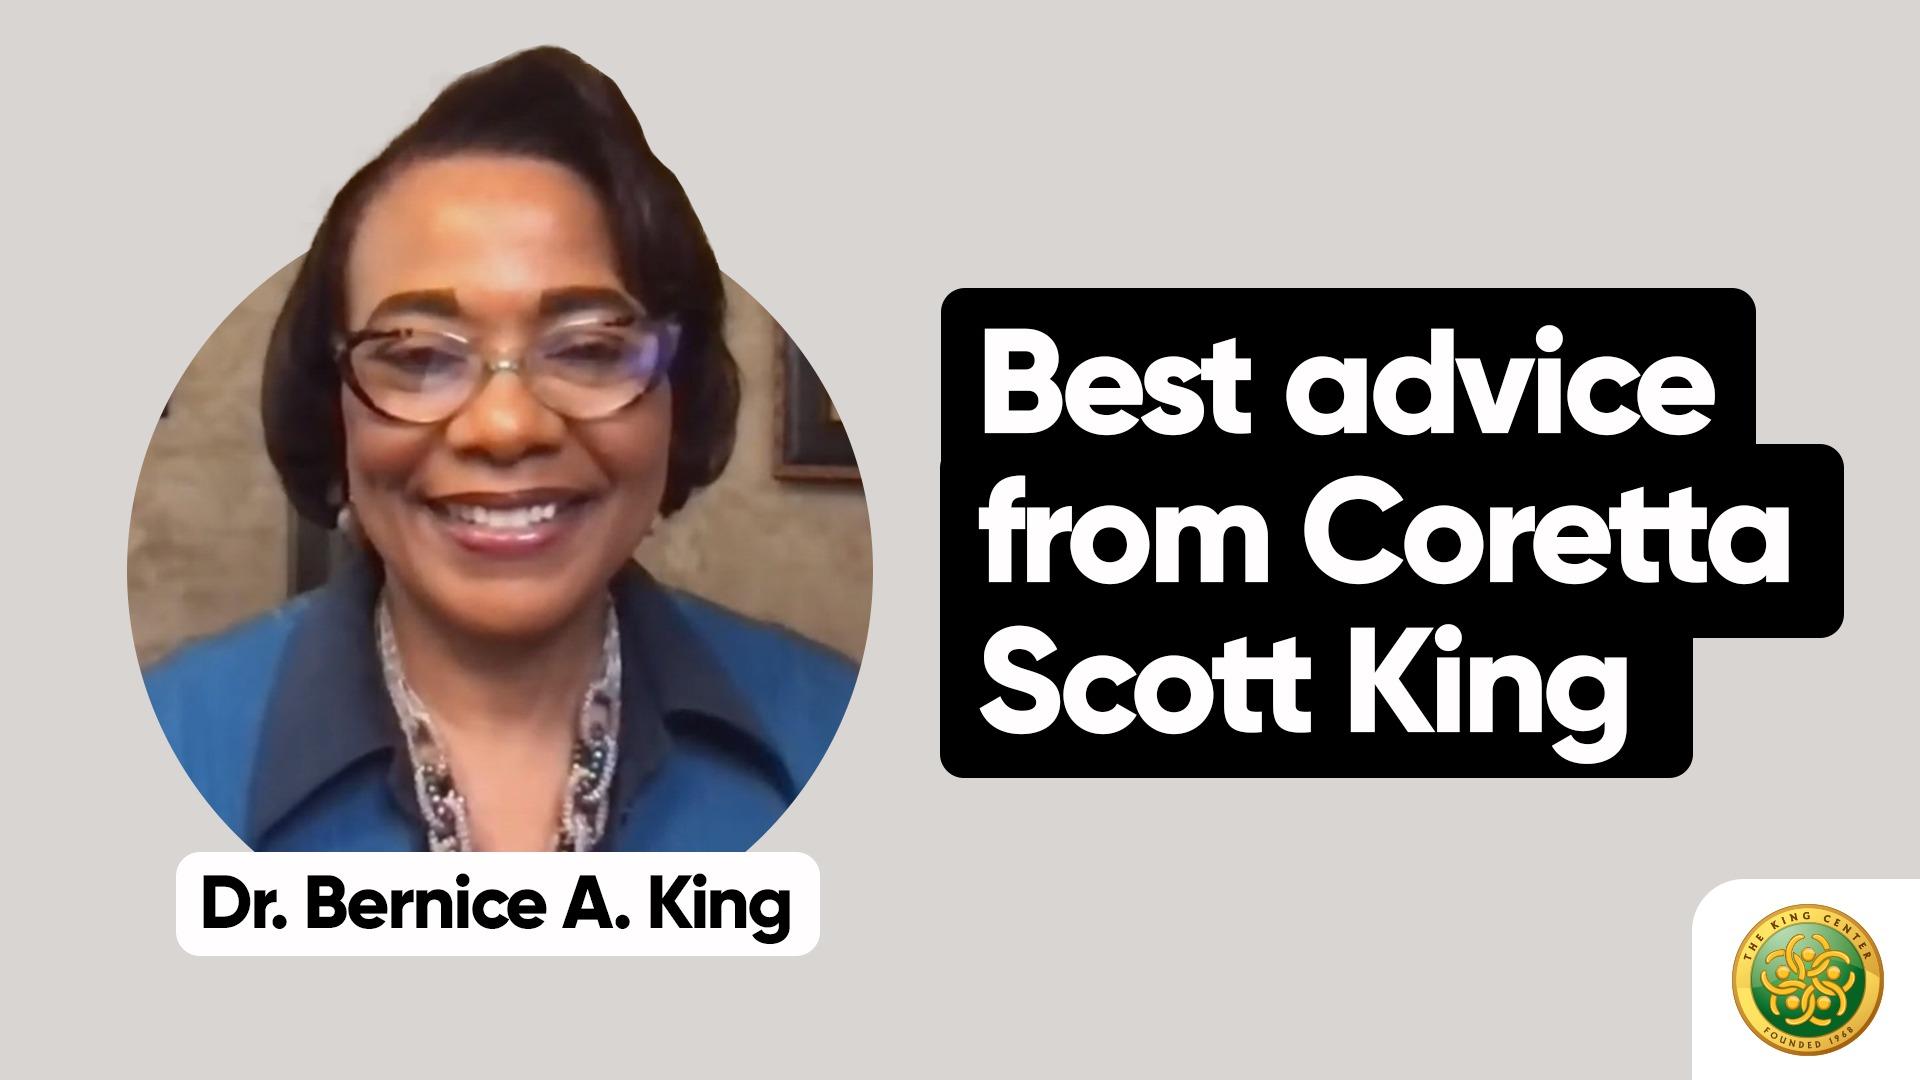 Best advice from Mrs Coretta Scott King to her daughter Dr. Bernice A. King